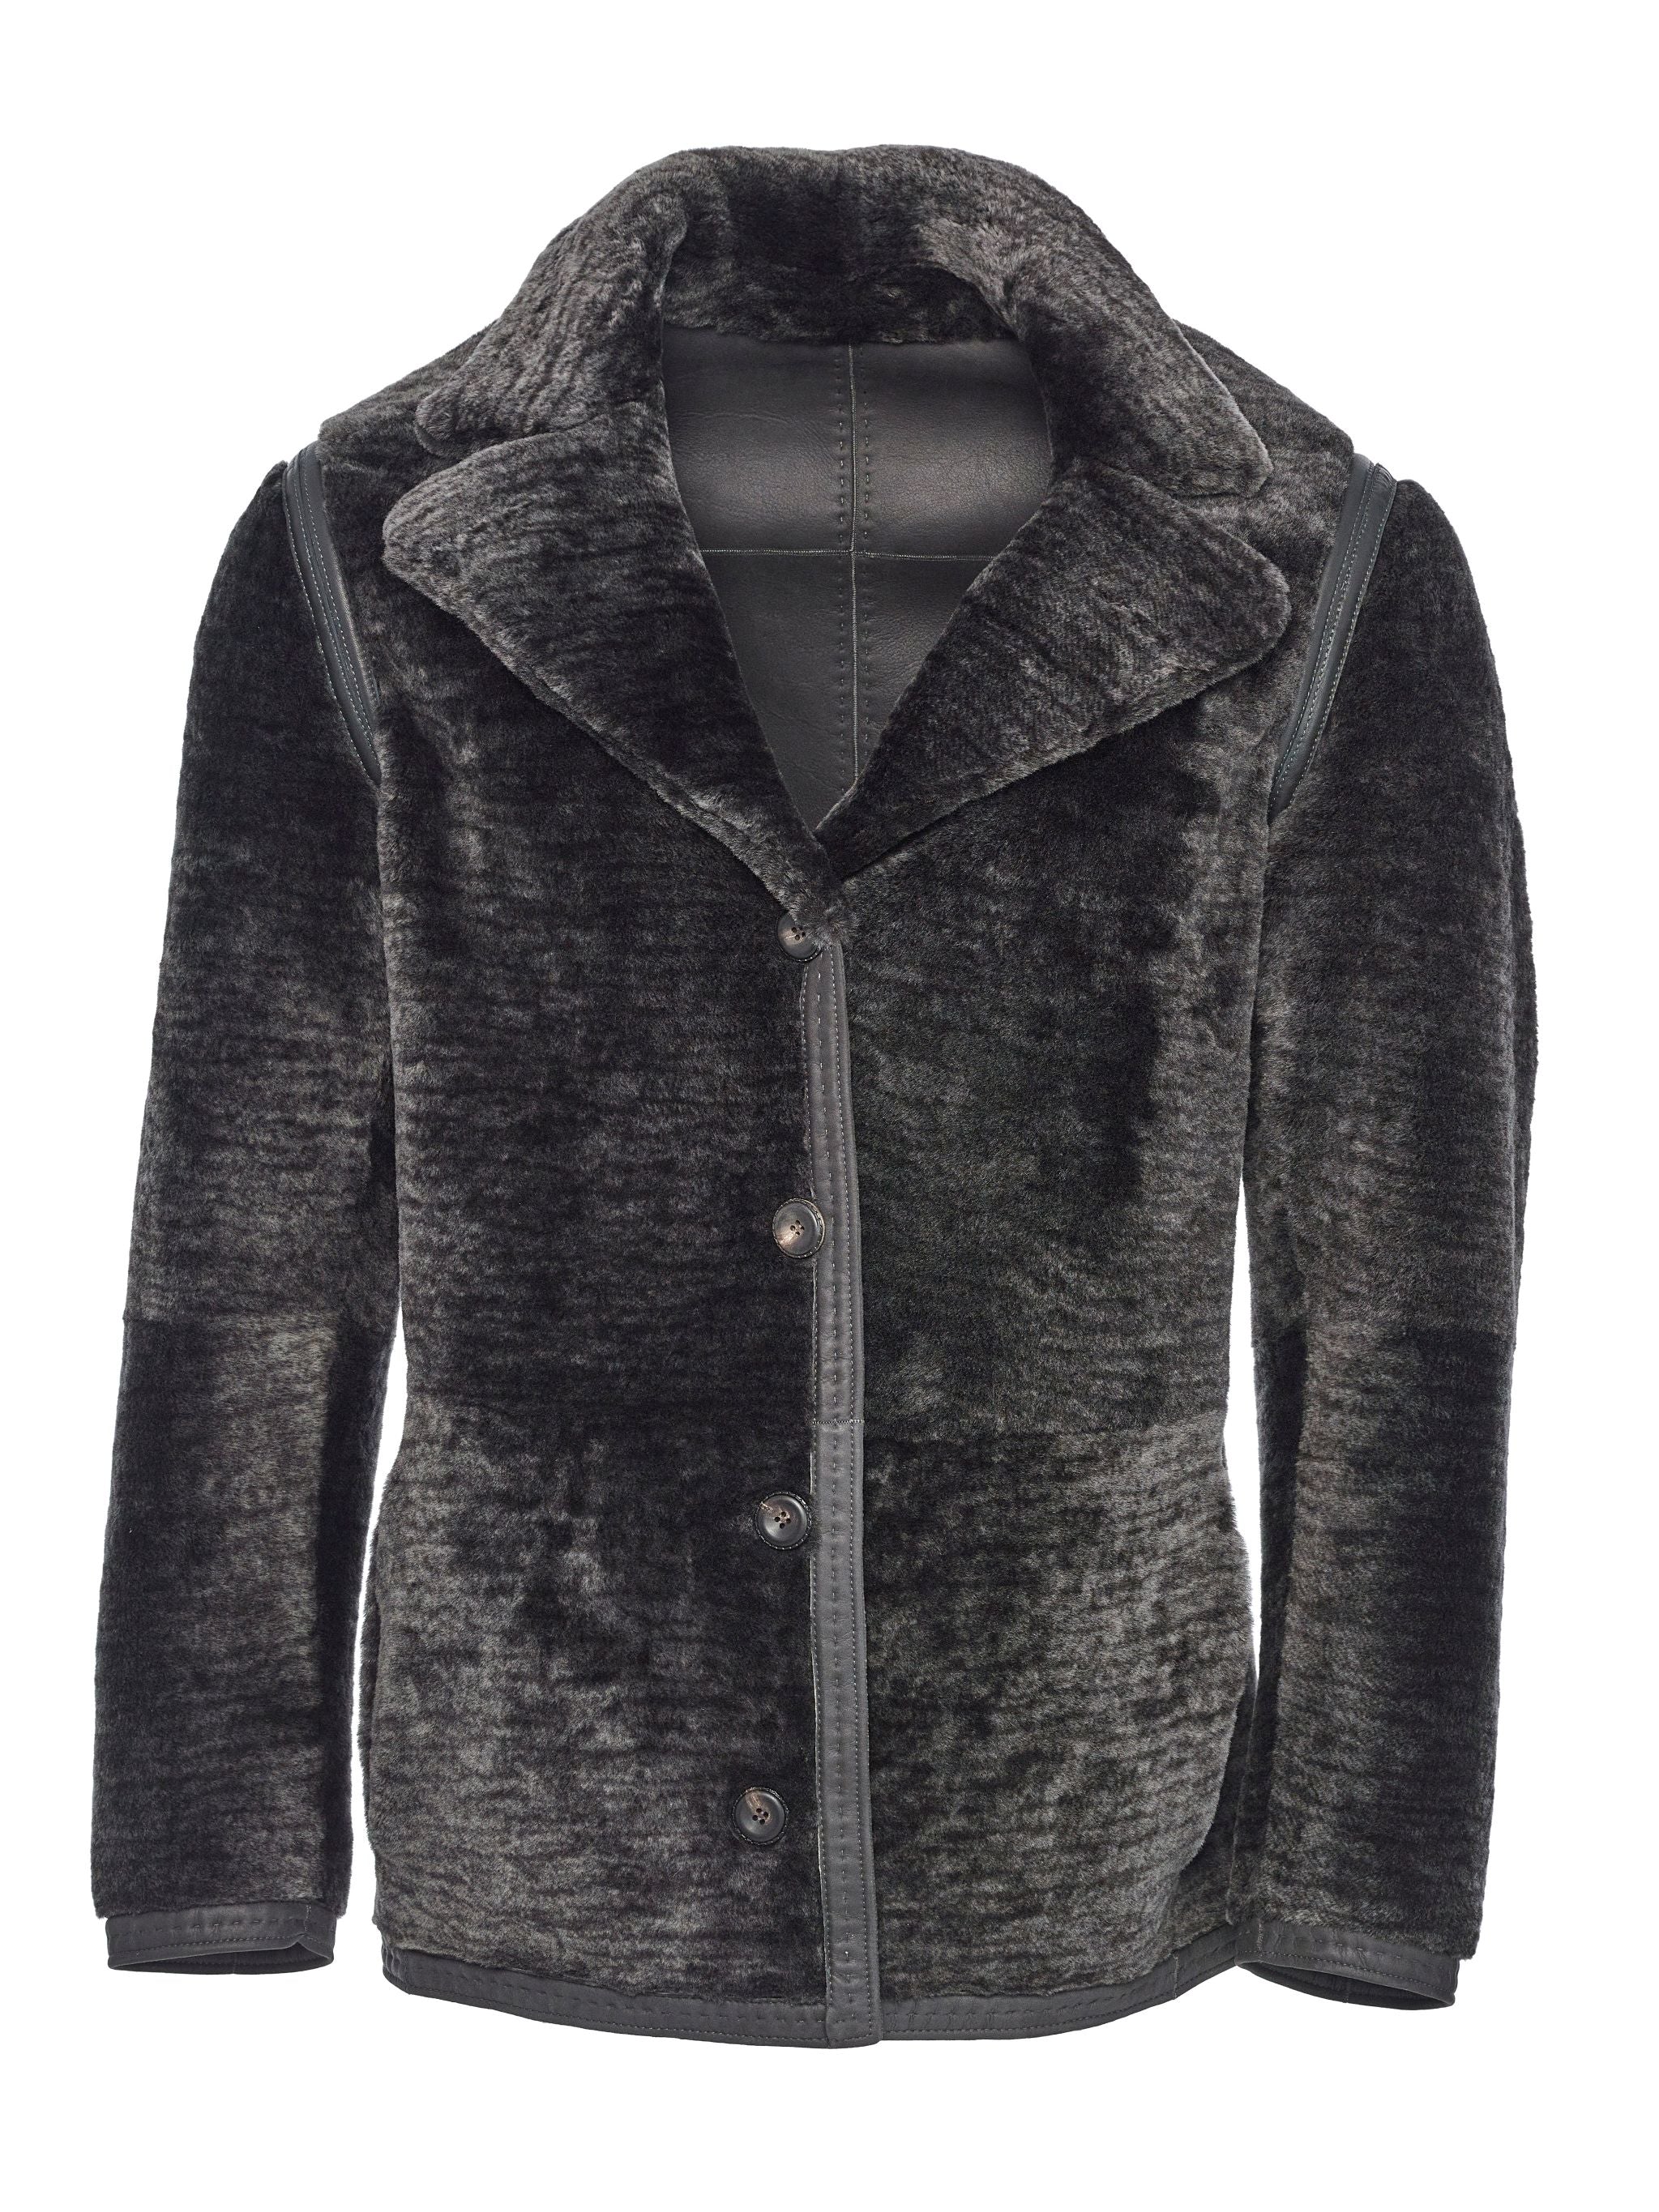 Reversible Spanish Lancon shearling with 4-artery track stitched nappa seams and horn buttons